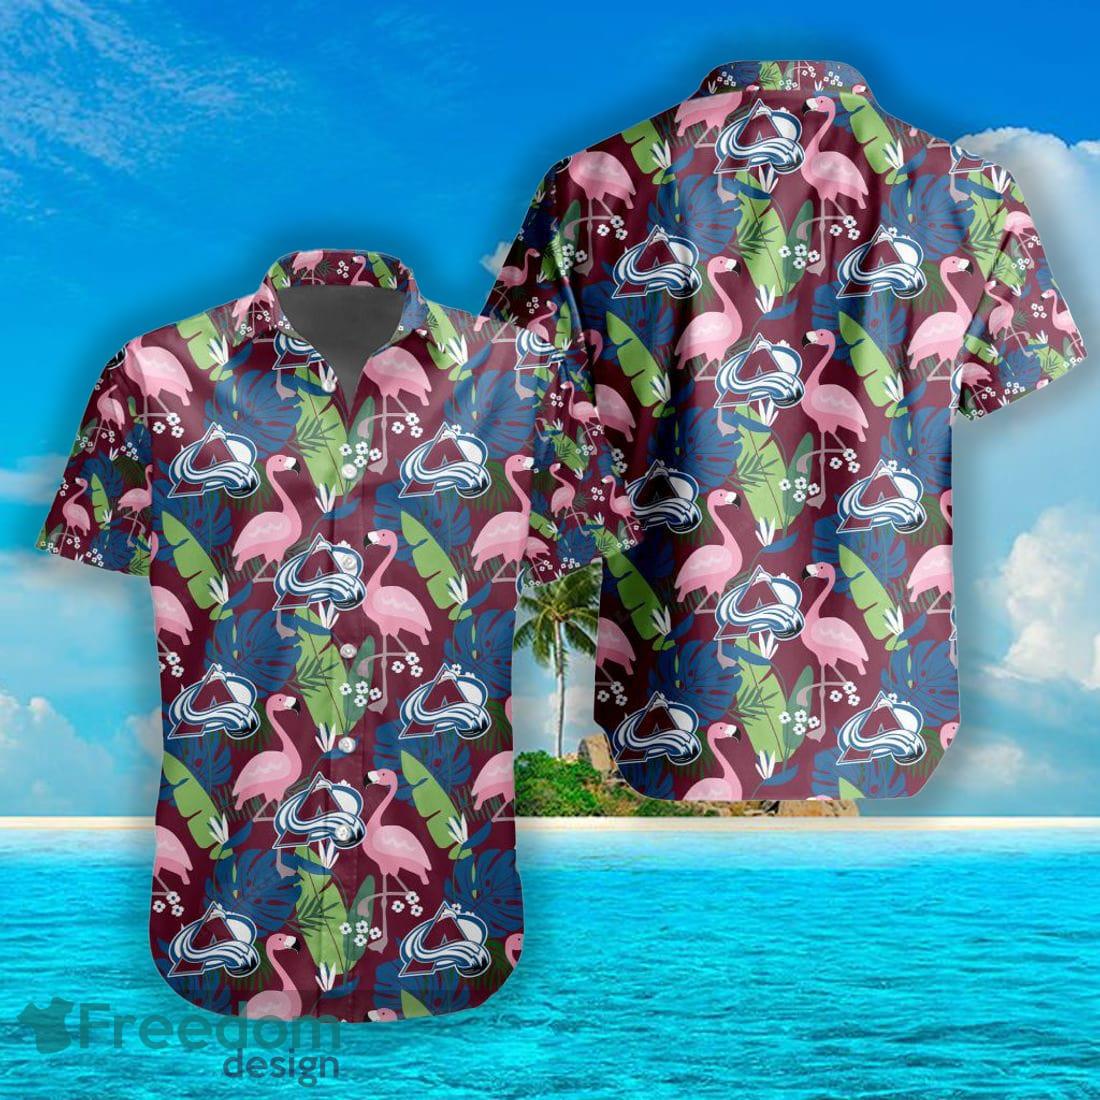 Colorado Avalanche NHL Hawaiian Shirt For Men And Women Special Gift For  Real Fans - Freedomdesign